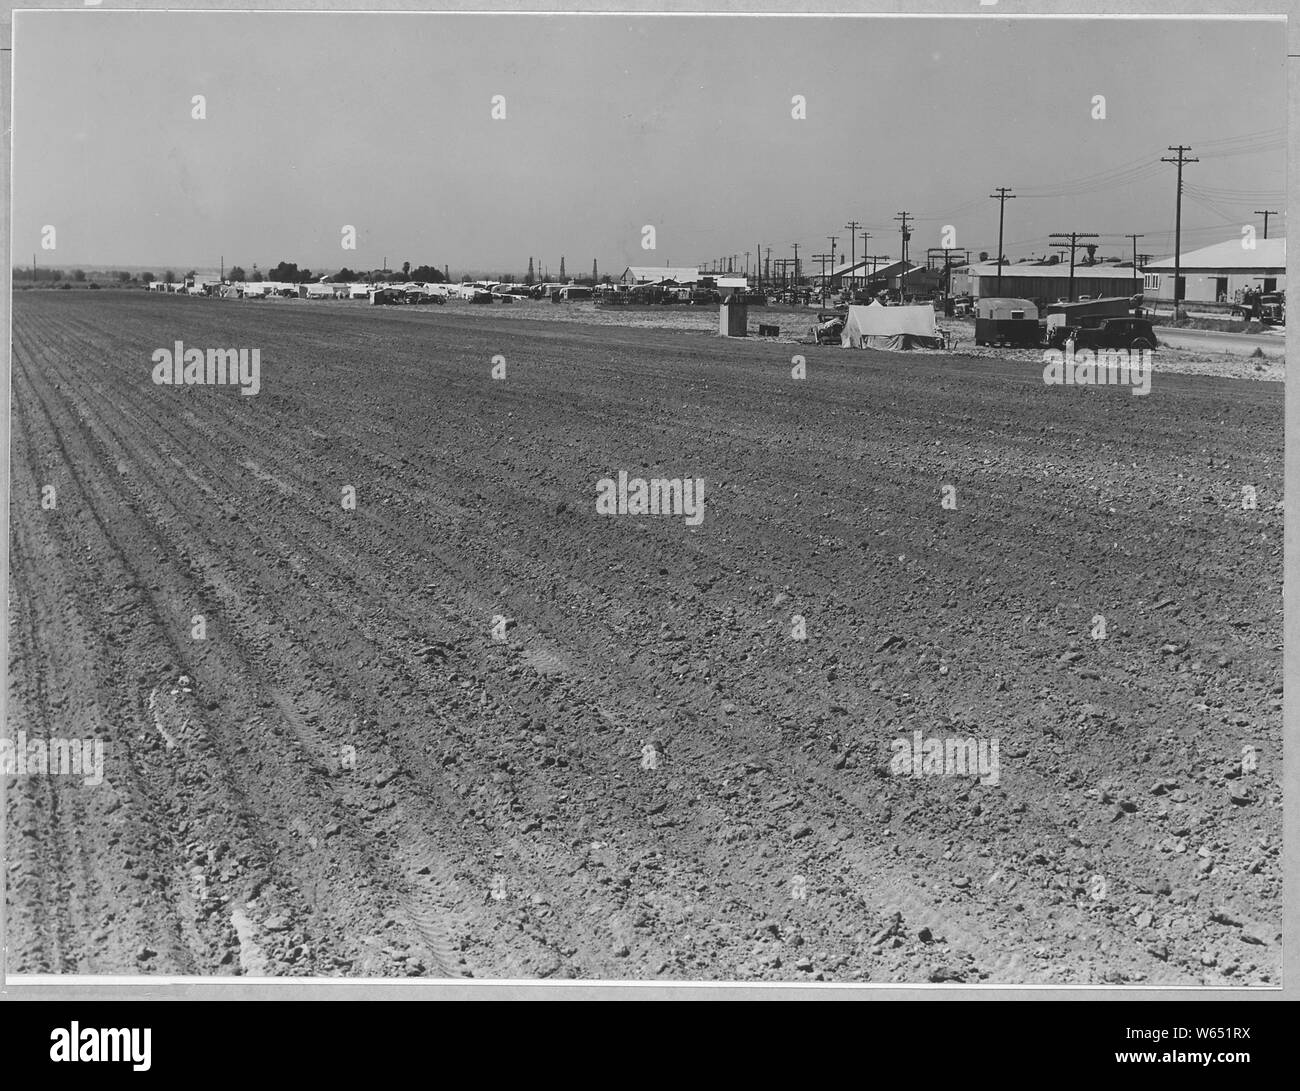 Edison, Kern County, California. The town of Edison, a potato town in a nearly developing large-scal . . .; Scope and content:  Full caption reads as follows: Edison, Kern County, California. The town of Edison, a potato town in a nearly developing large-scale potato district. Shows camp for migratory potato pickers across field of potatoes already picked. Shows packing sheds along railroad tracks. 27,250 acres of potatoes were planted in Kern County in 1940. Over 200 families encamped in tents and trailers during this potato season, but not getting much work in the fields because of locals. B Stock Photo